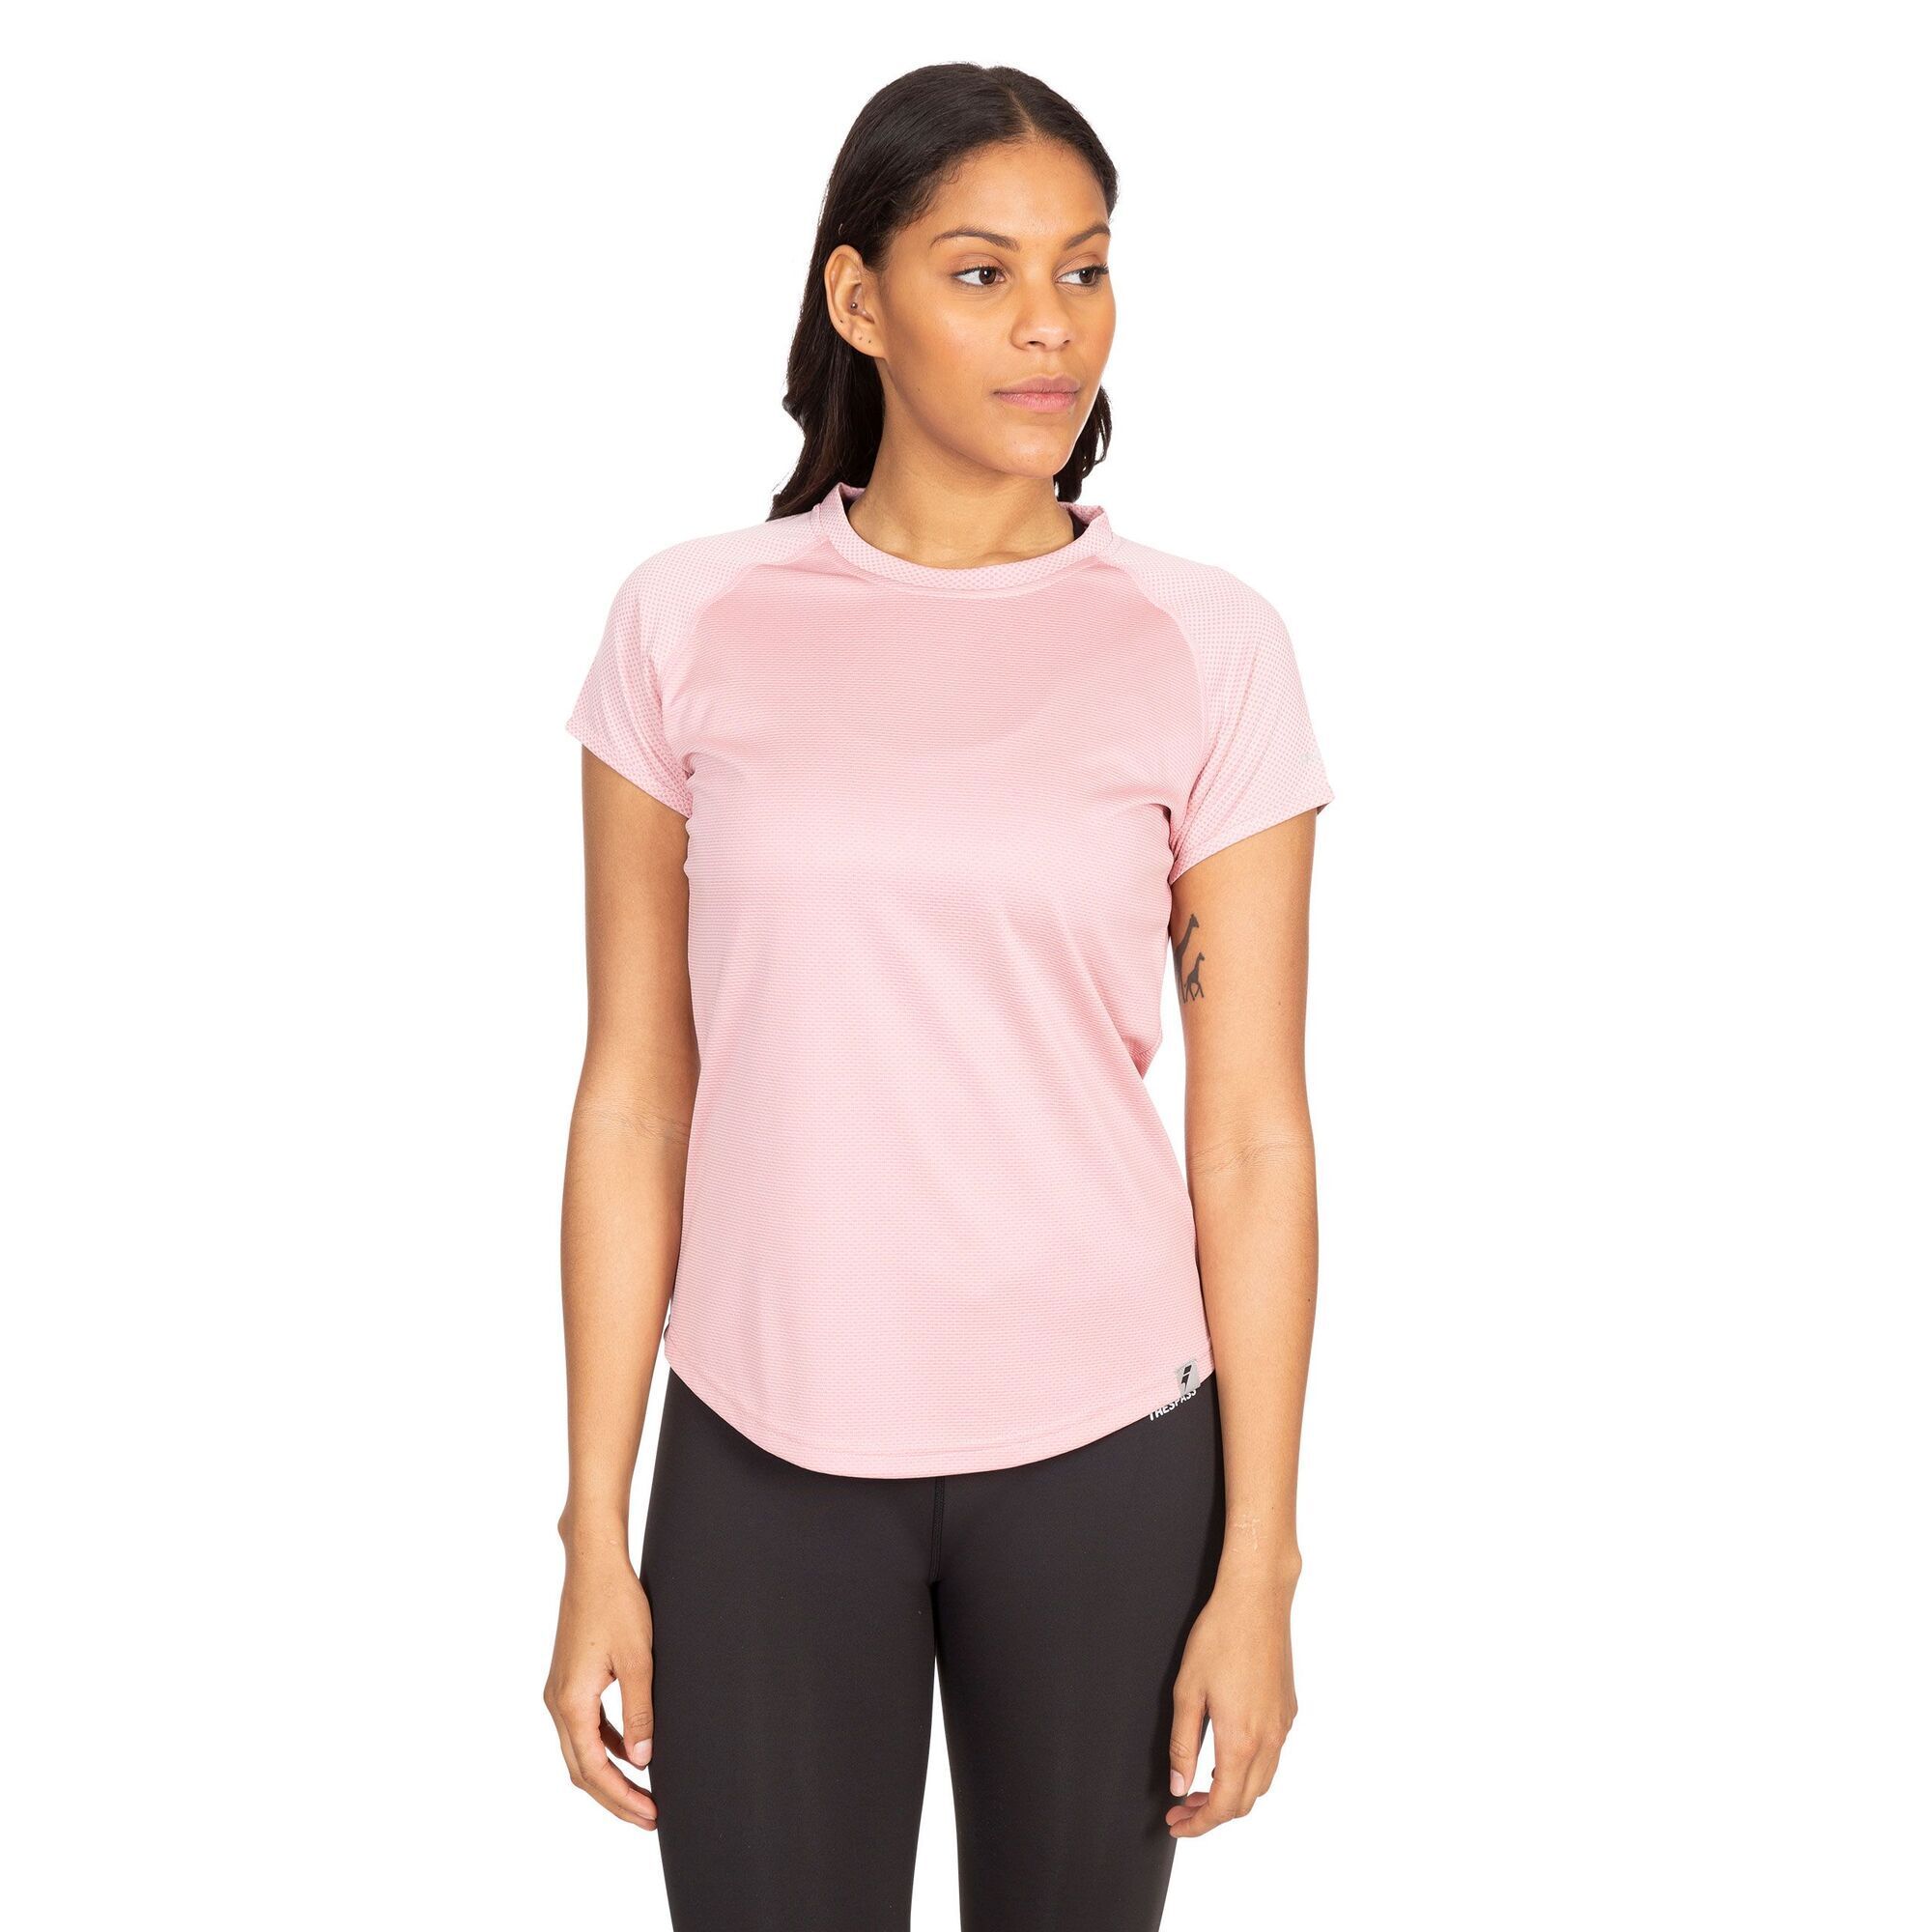 100% Polyester. Short sleeve. Round neck. Raglan sleeve. Contrast inner back neck binding. Reflective printed logos. Wicking. Quick dry. Trespass Womens Chest Sizing (approx): XS/8 - 32in/81cm, S/10 - 34in/86cm, M/12 - 36in/91.4cm, L/14 - 38in/96.5cm, XL/16 - 40in/101.5cm, XXL/18 - 42in/106.5cm.